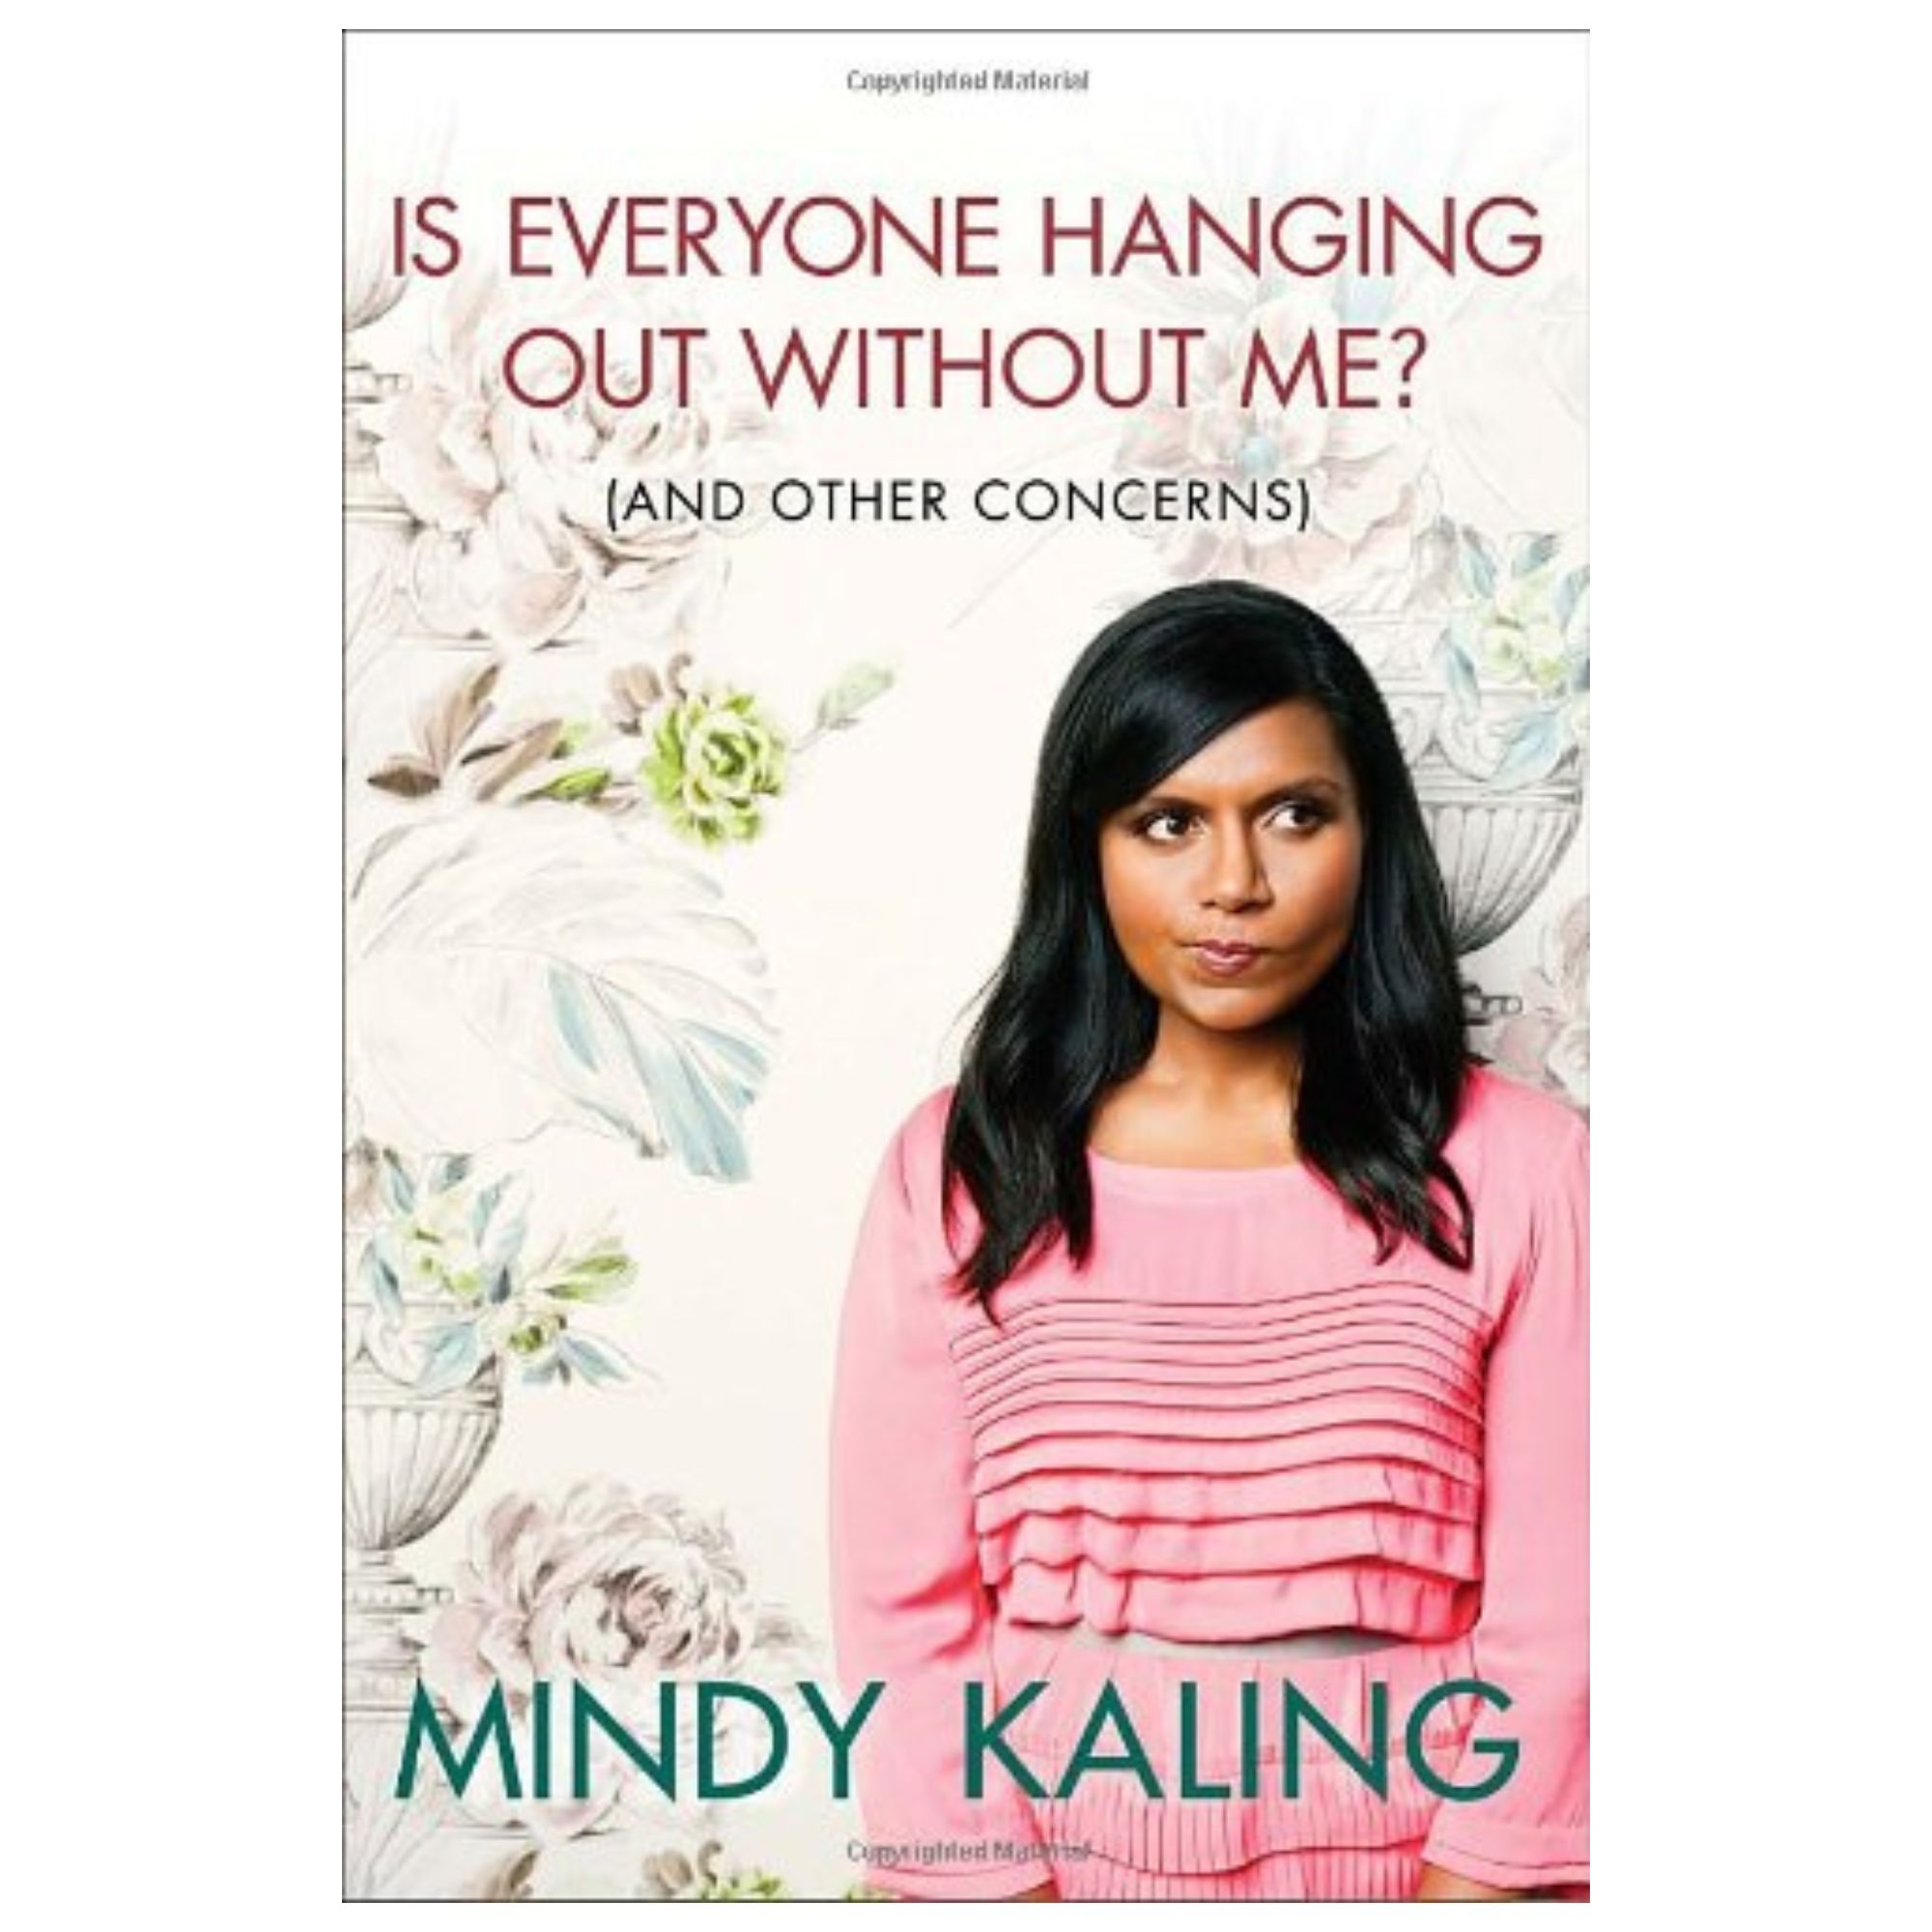 Mindy Kaling's walls make her office perfect for productivity